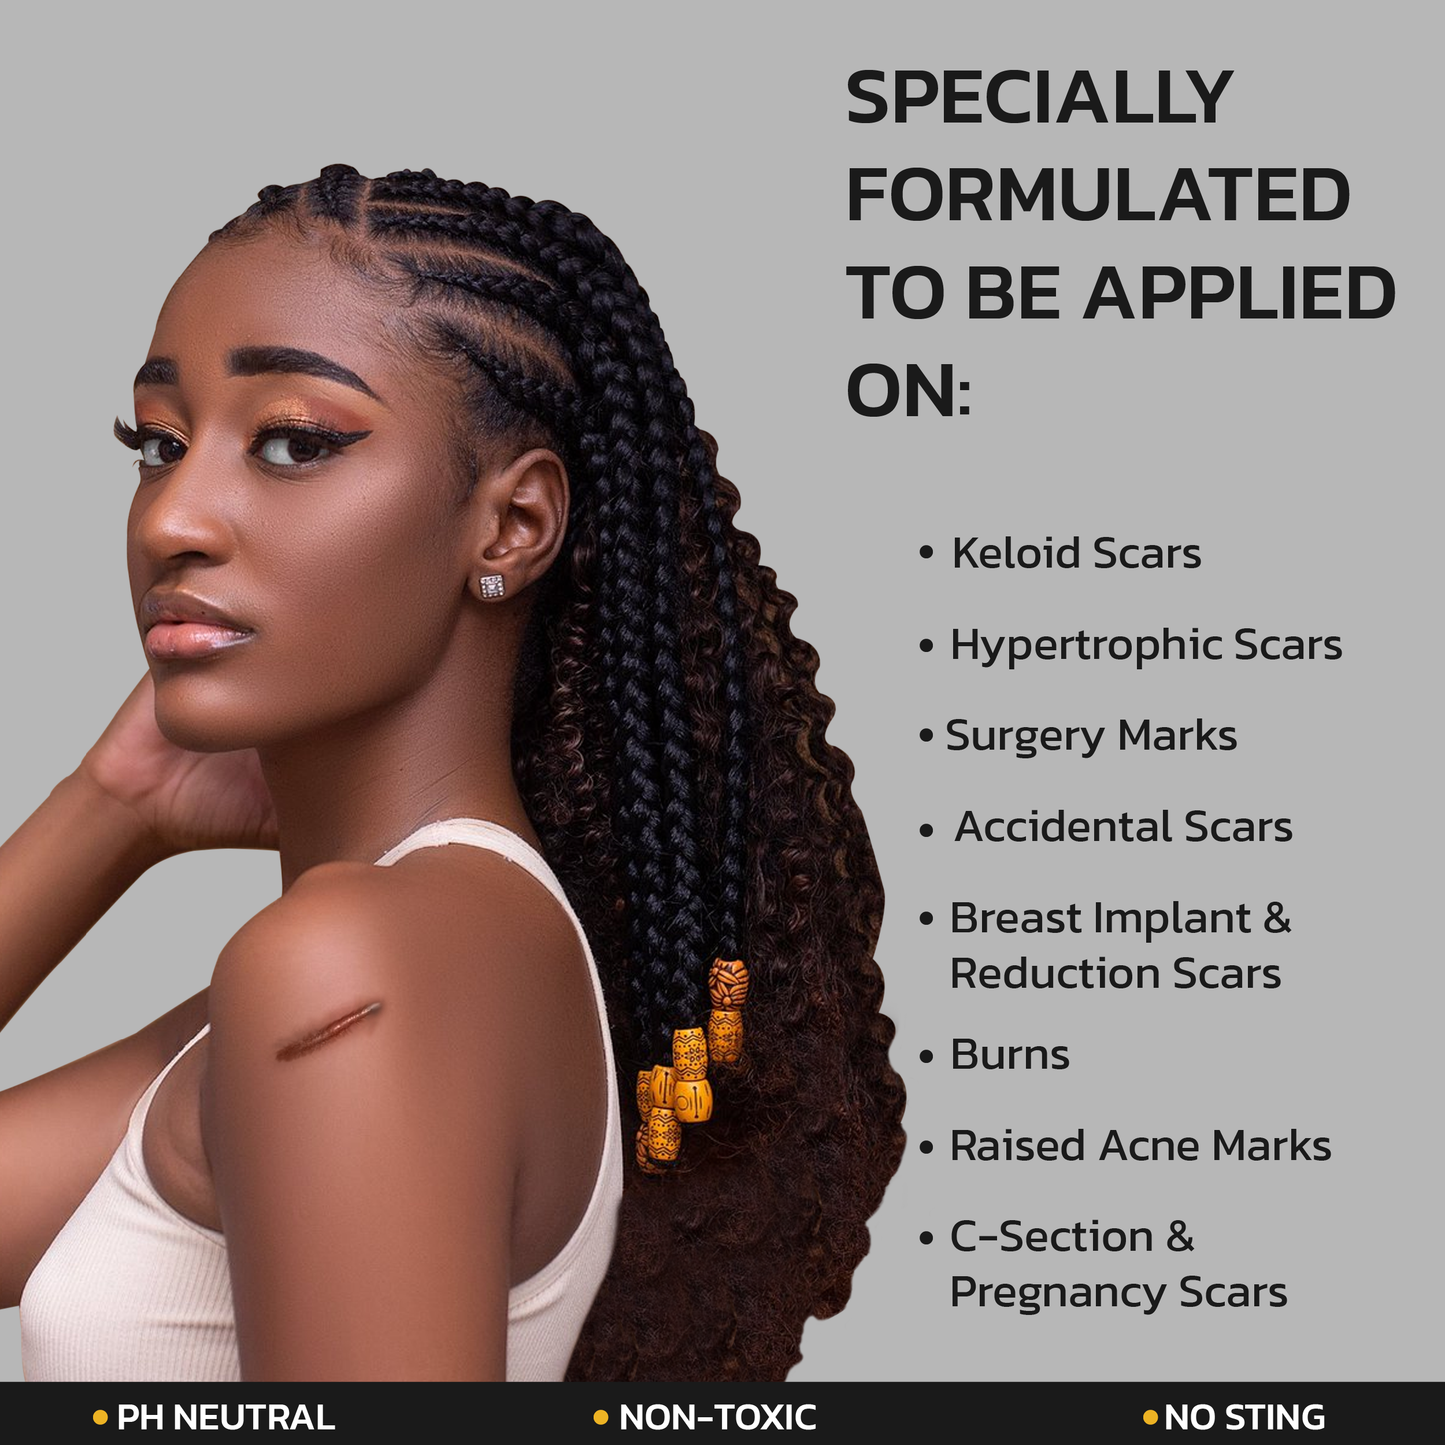 Scar gel for keloid and hypertrophic scars